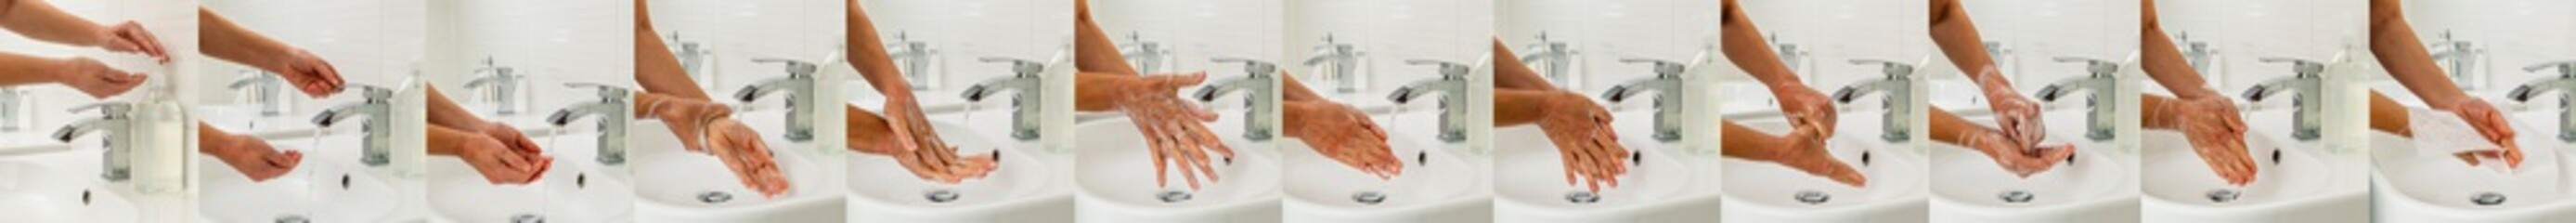 Washing hands using medical instructions to protect against viruses step by step